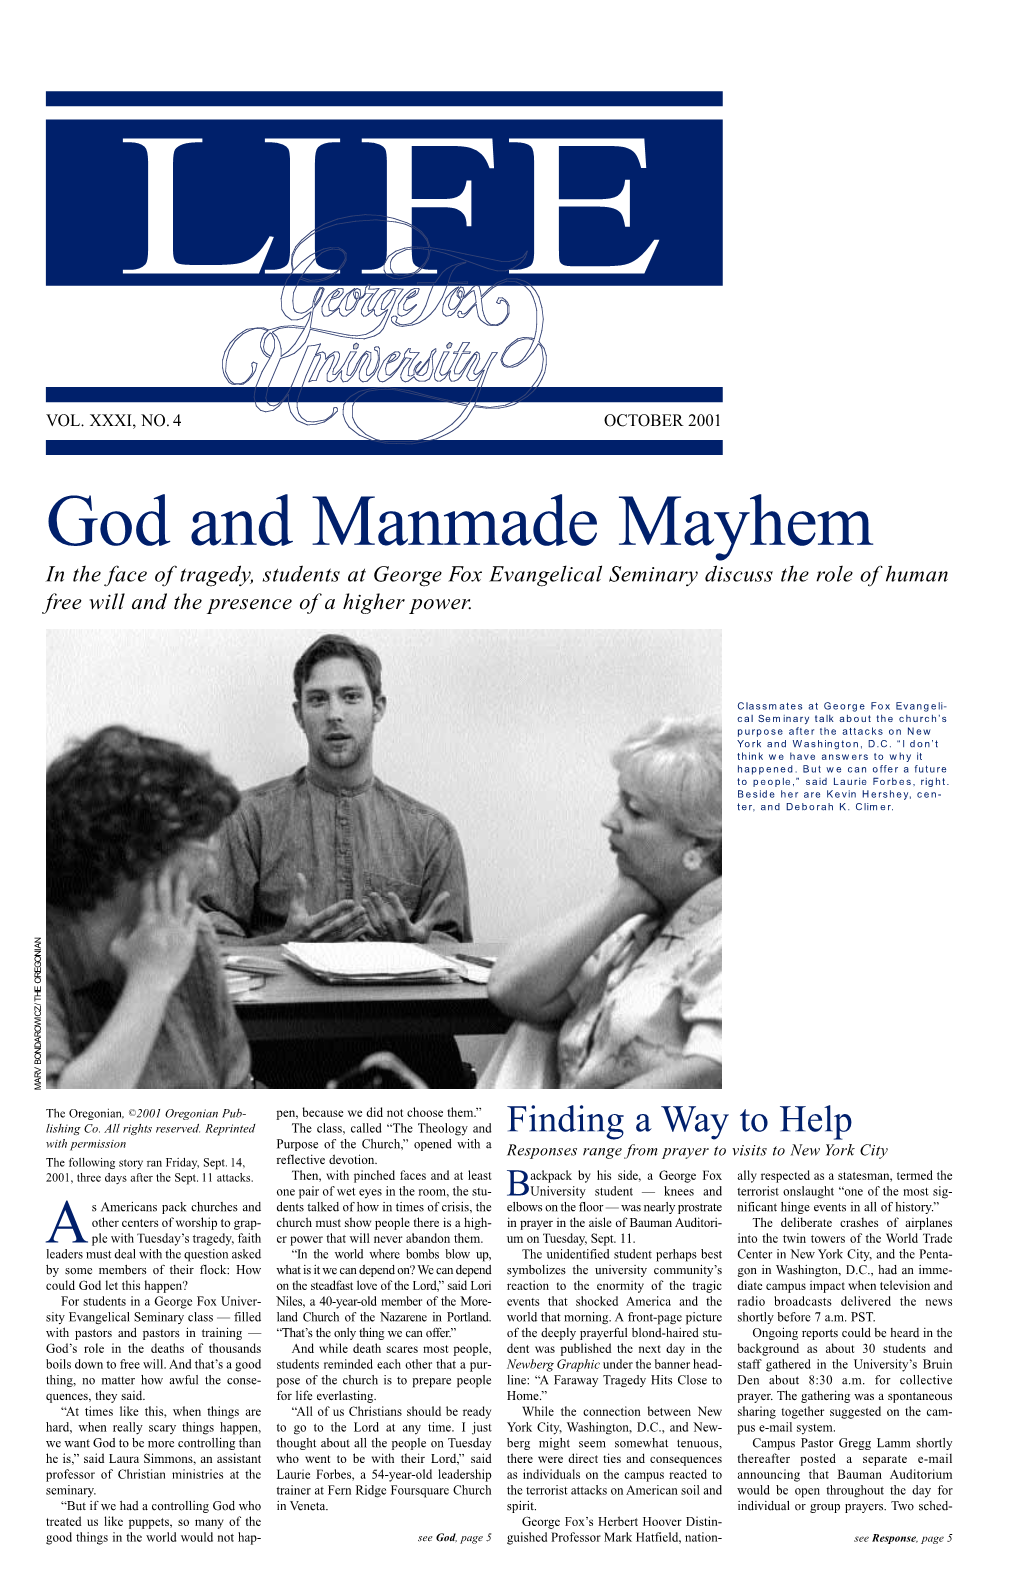 God and Manmade Mayhem in the Face of Tragedy, Students at George Fox Evangelical Seminary Discuss the Role of Human Free Will and the Presence of a Higher Power